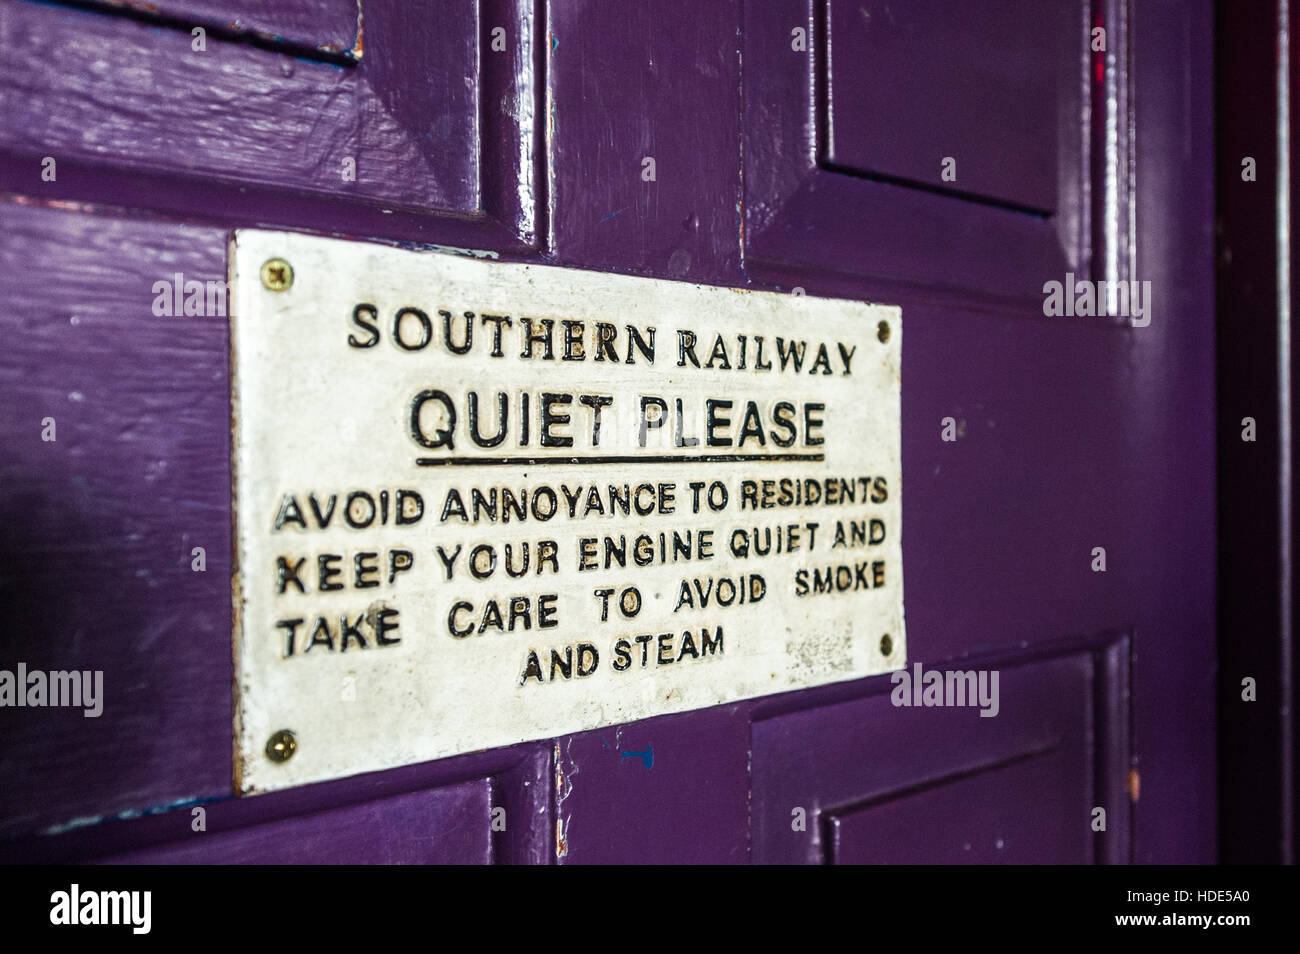 A Southern Railway 'Quiet Please' sign on a purple door. Stock Photo